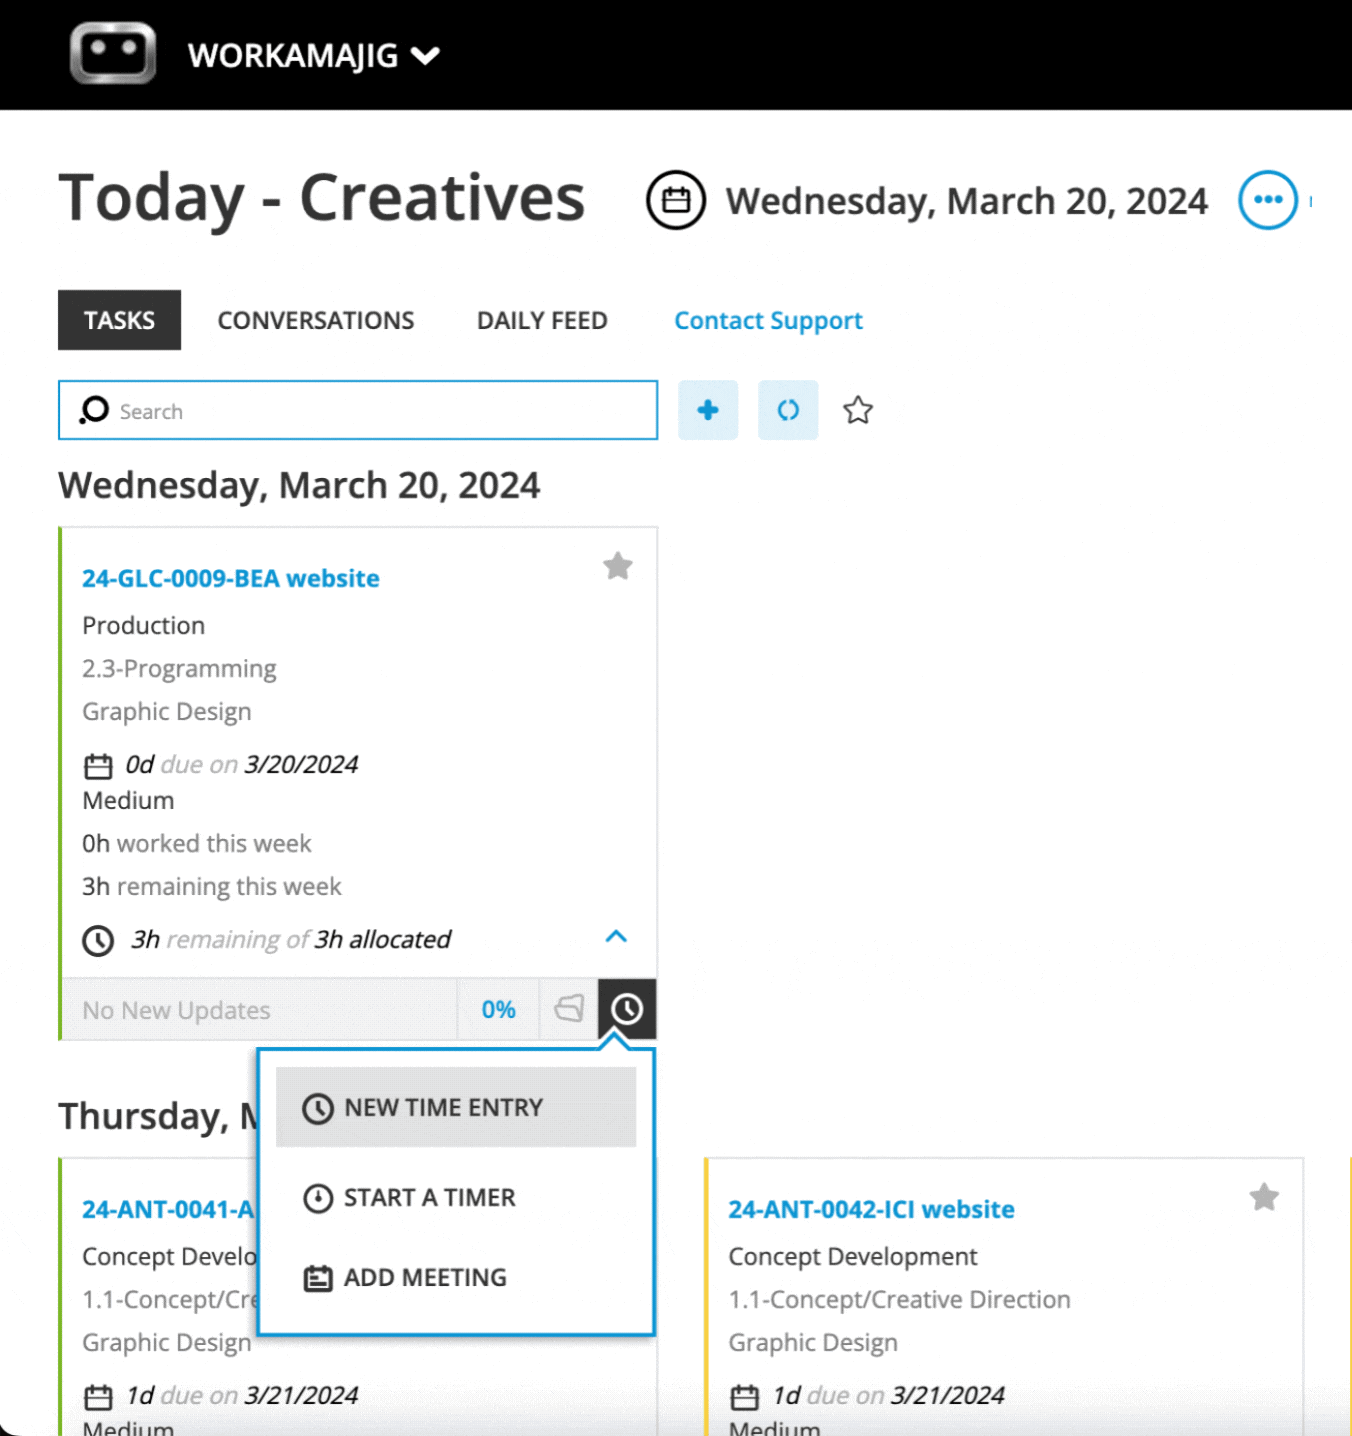 Workamajig dashboard: Today - Creatives - Tasks - New Time Entry for Projects [GIF]